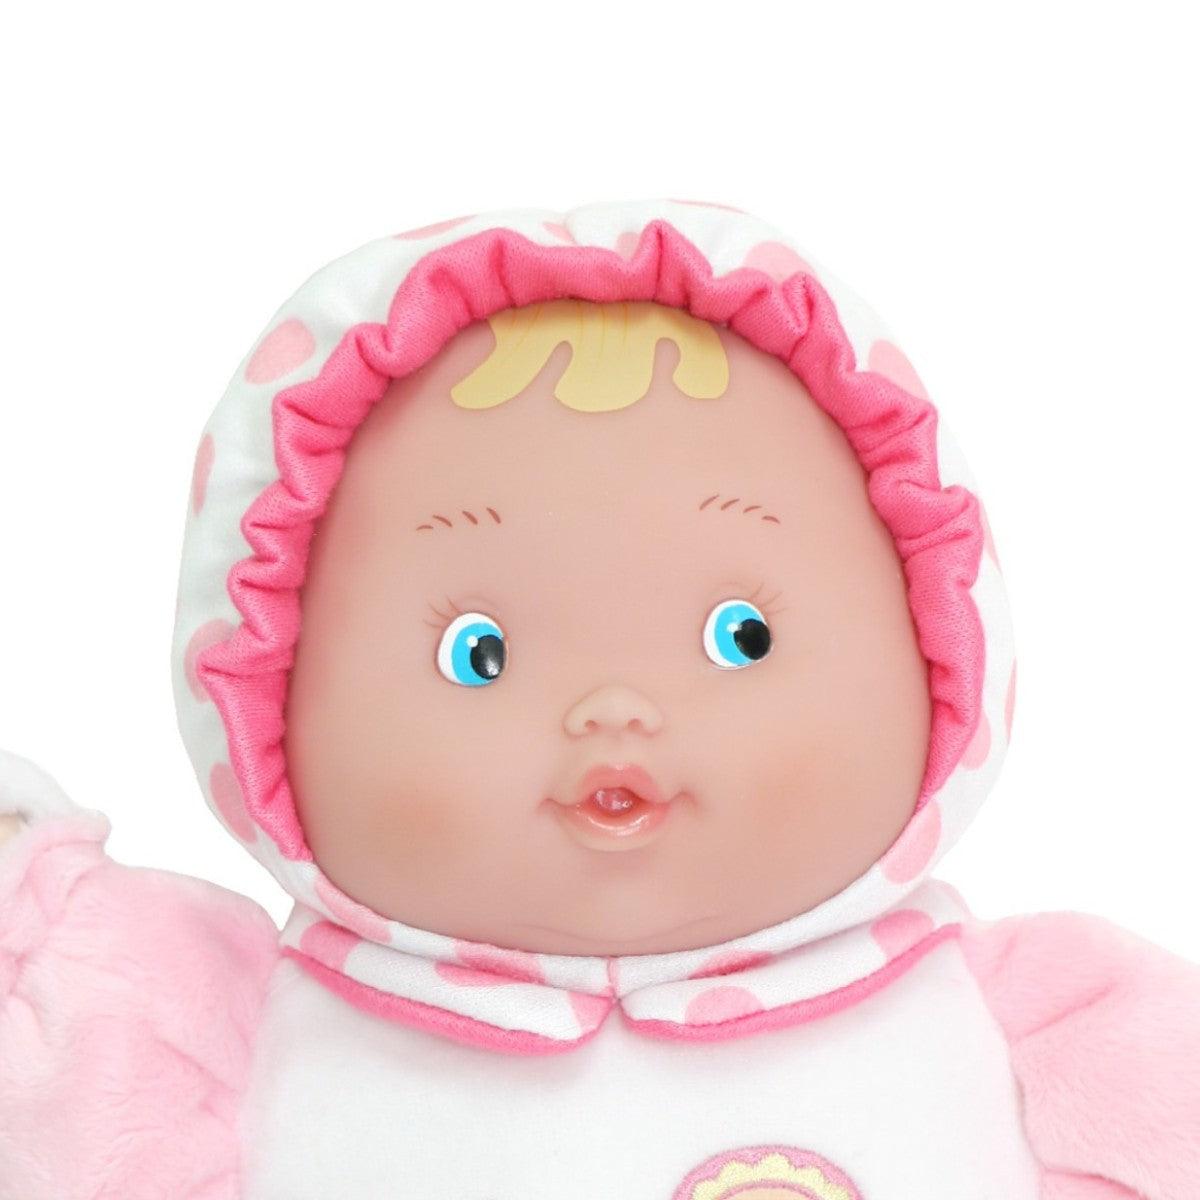 Lil' Hugs 12" Baby's First Doll - JC Toys Group Inc.